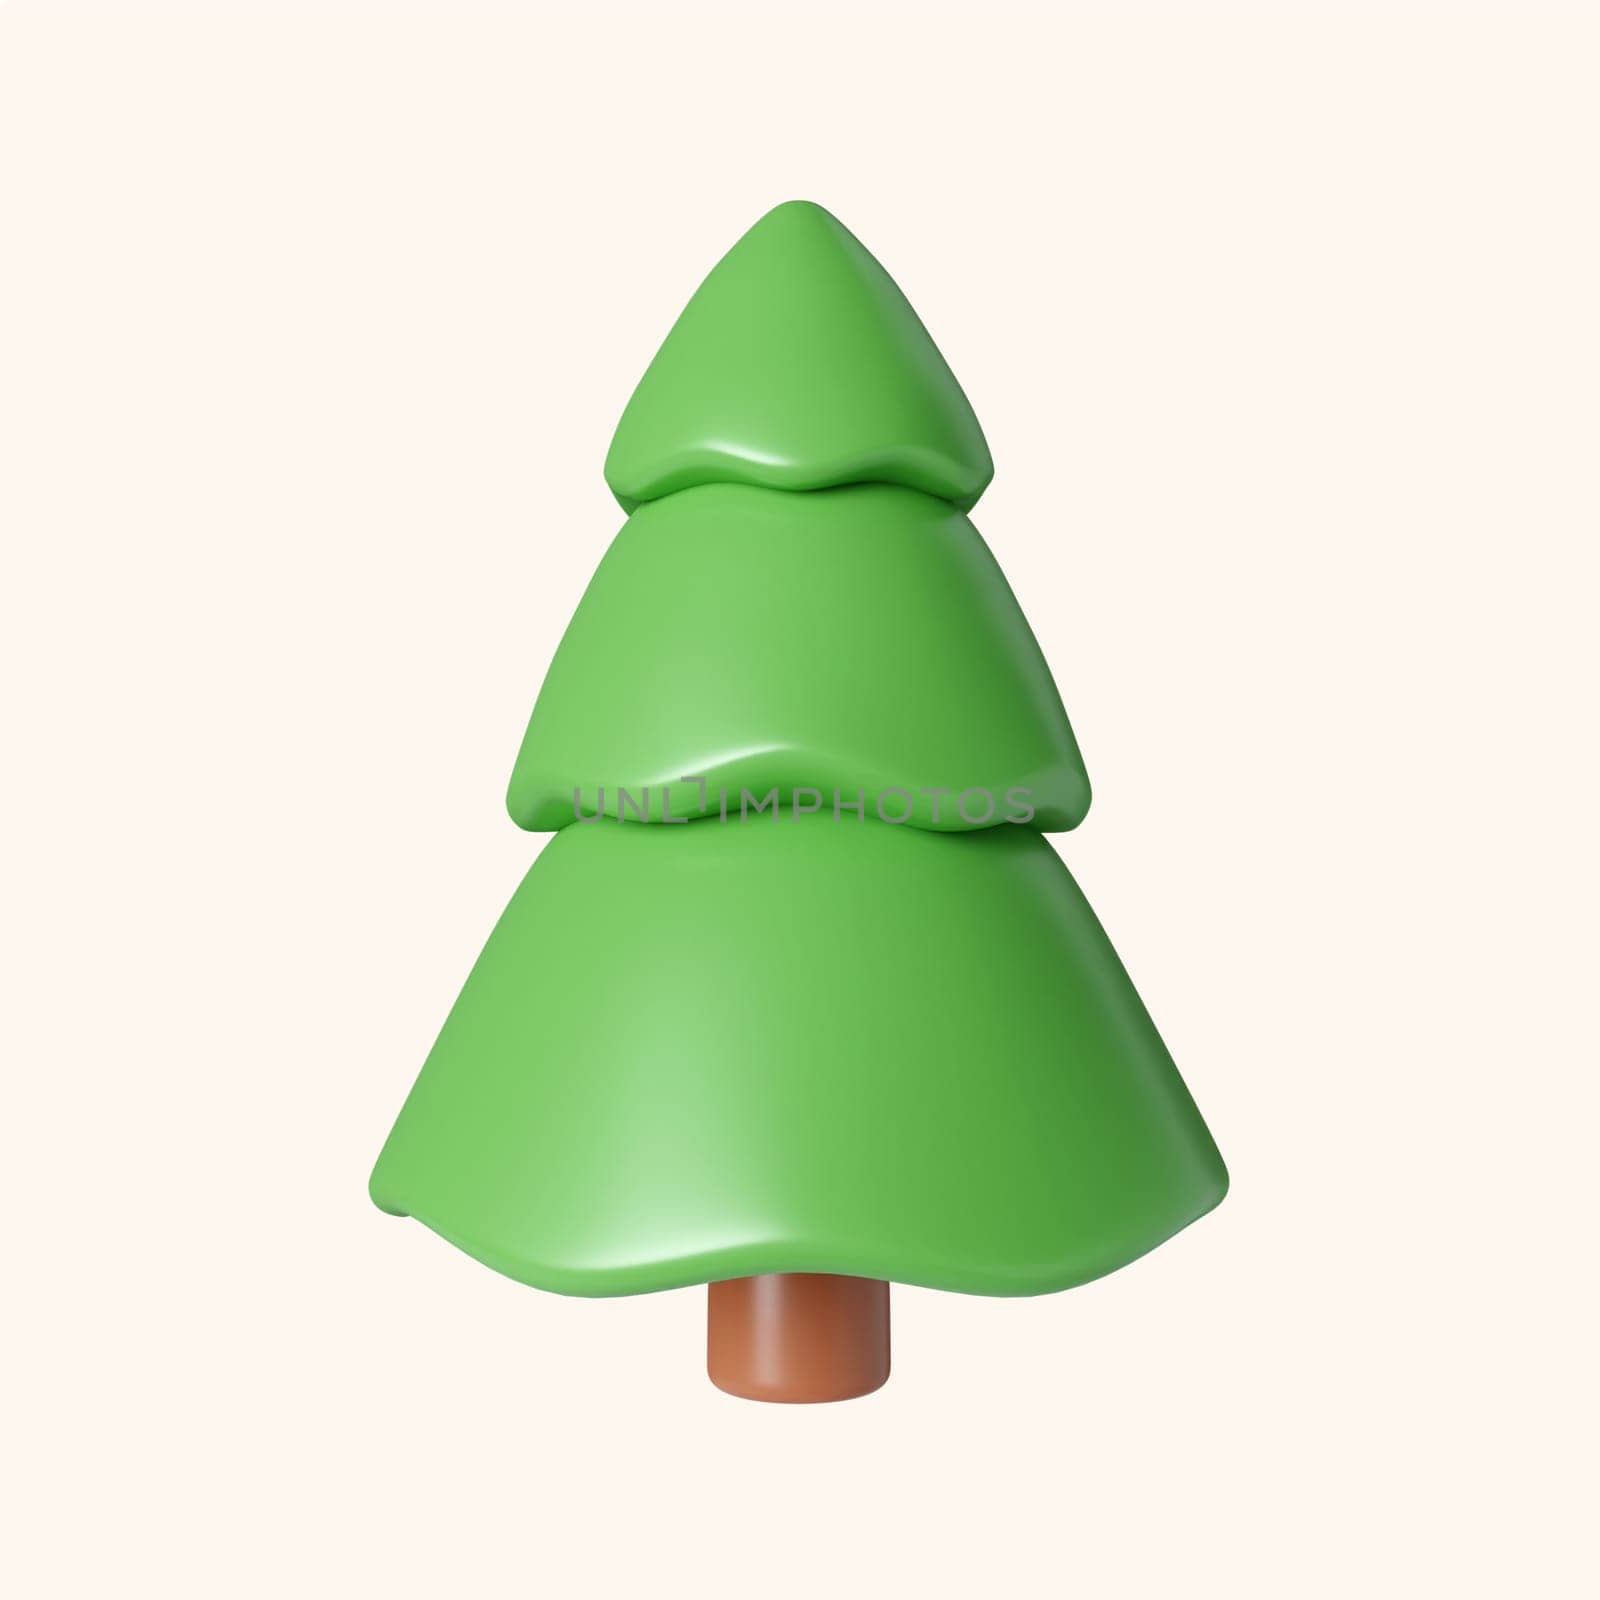 3d Christmas tree. minimal decorative festive conical shape tree. New Year's holiday decor. 3d design element In cartoon style. Icon isolated on white background. 3D illustration.